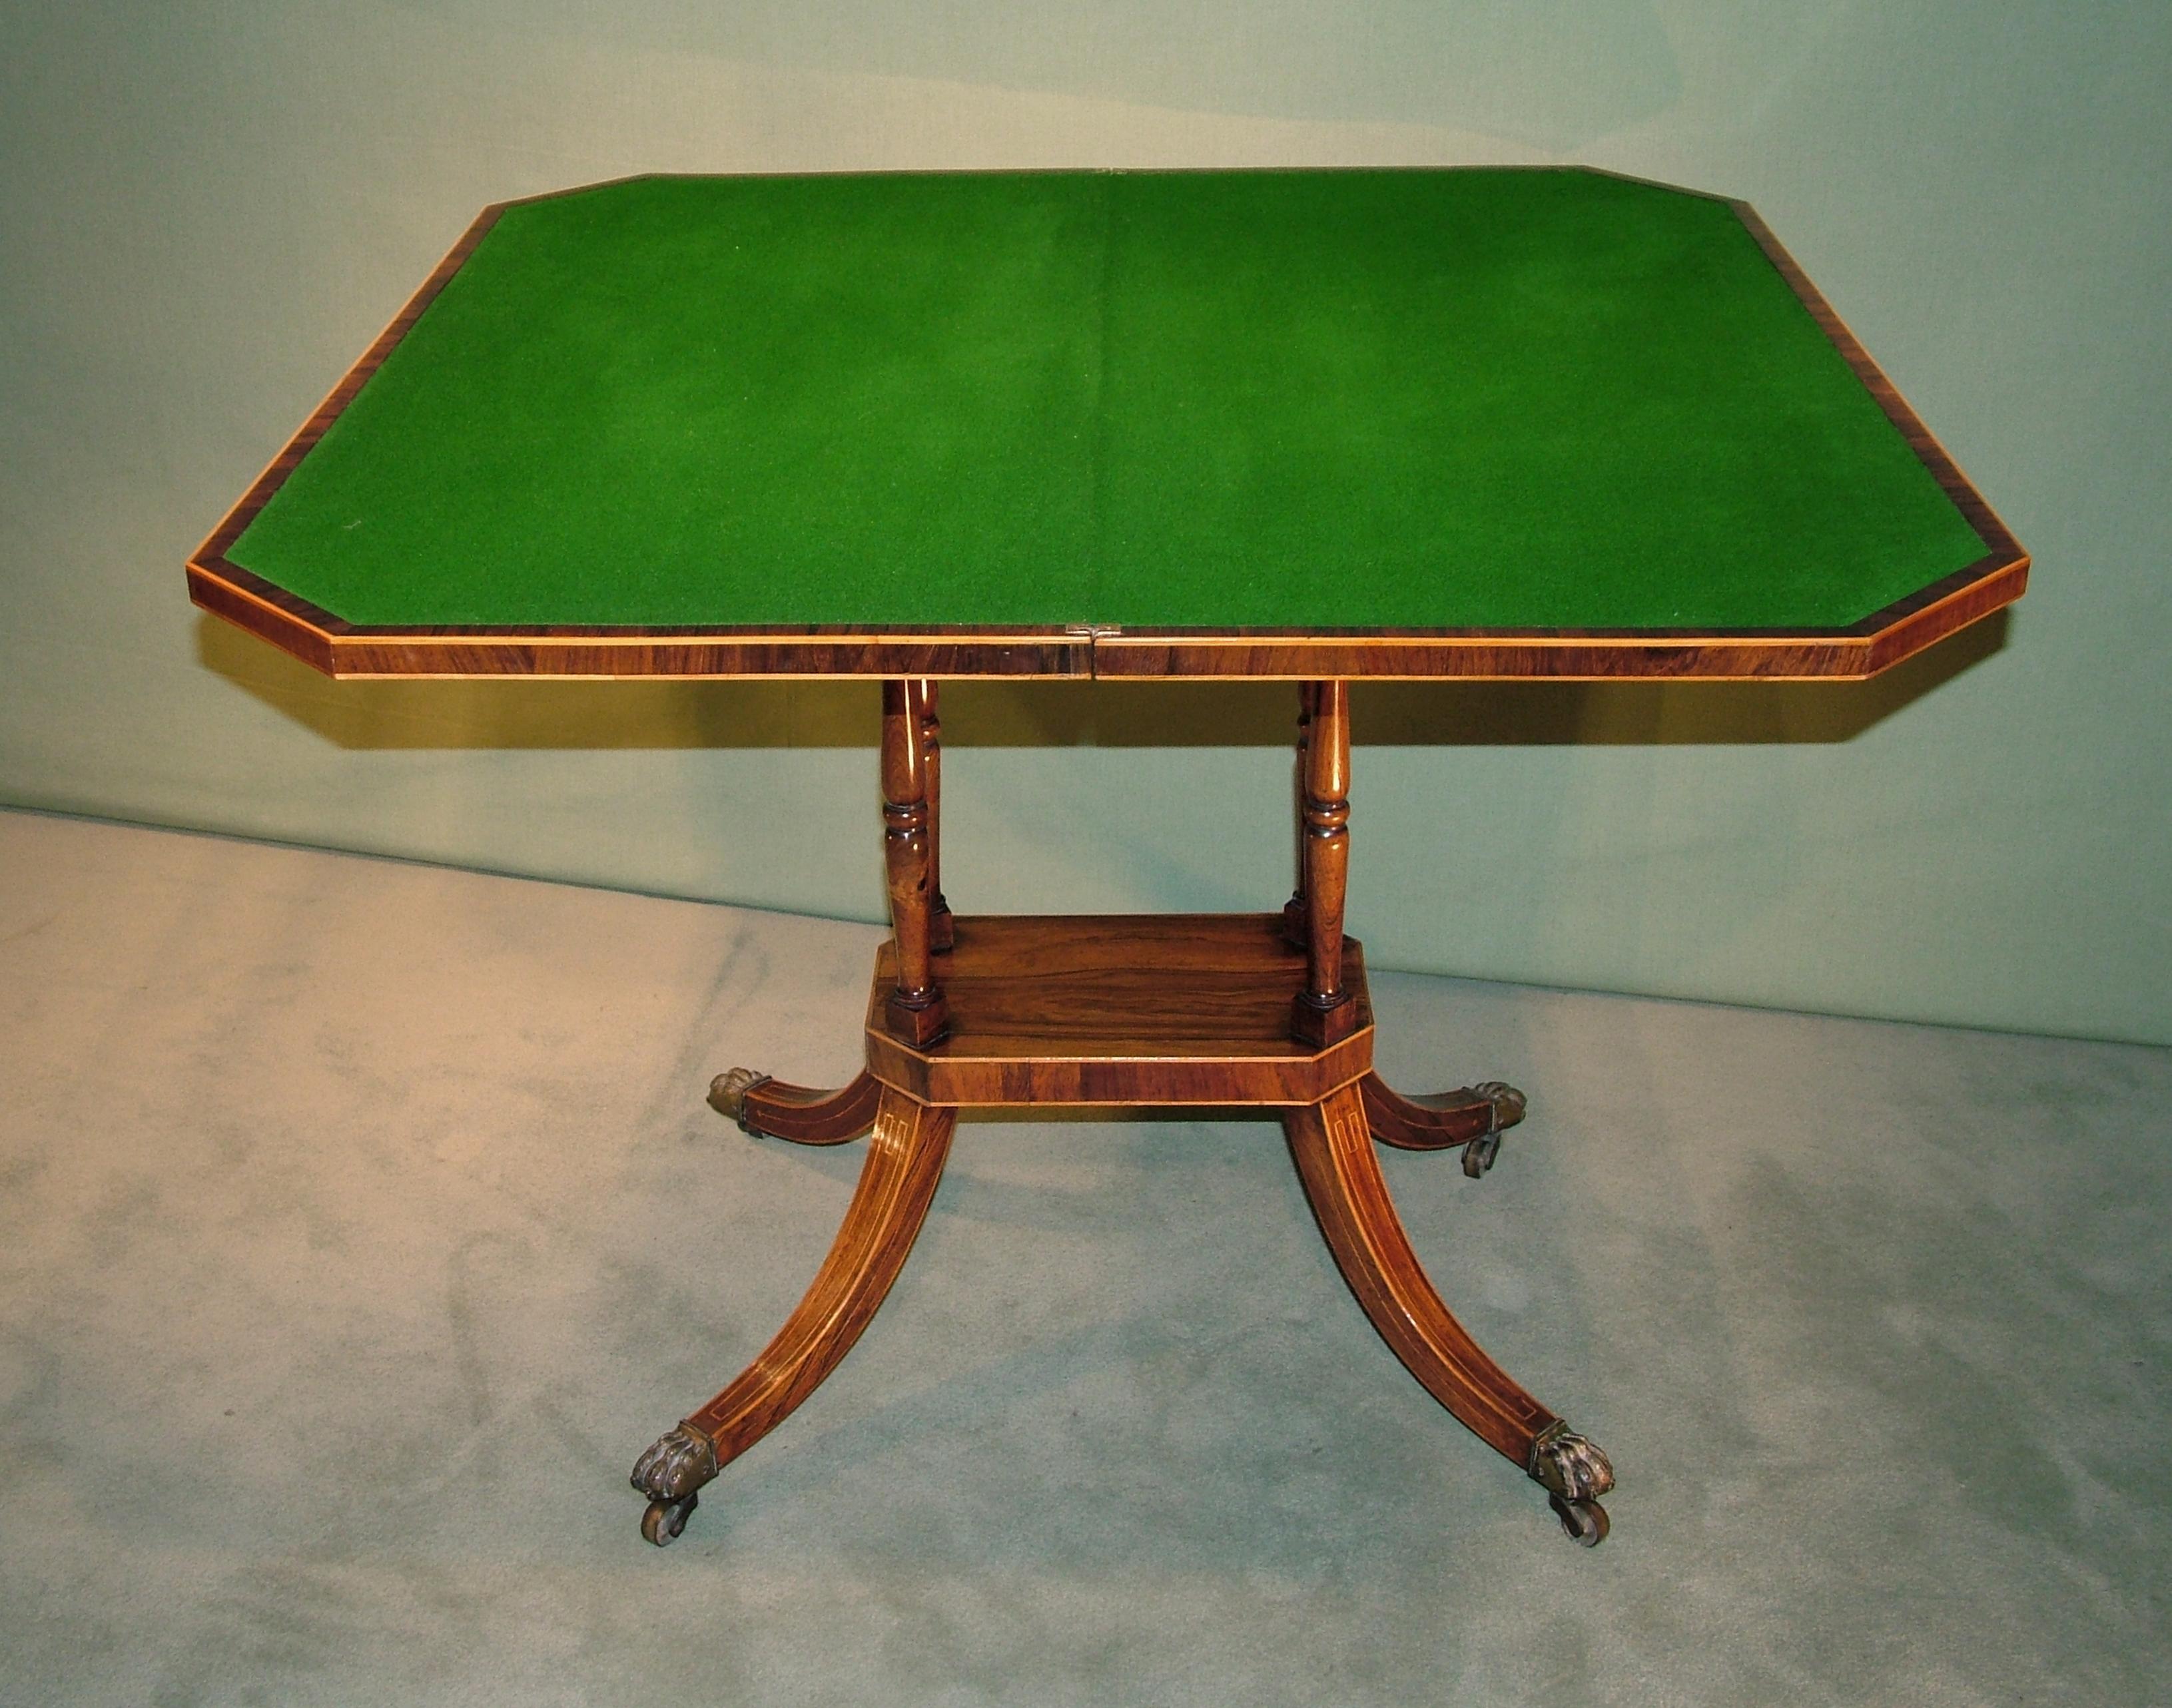 Polished 19th Century Regency Period Rosewood Card Table